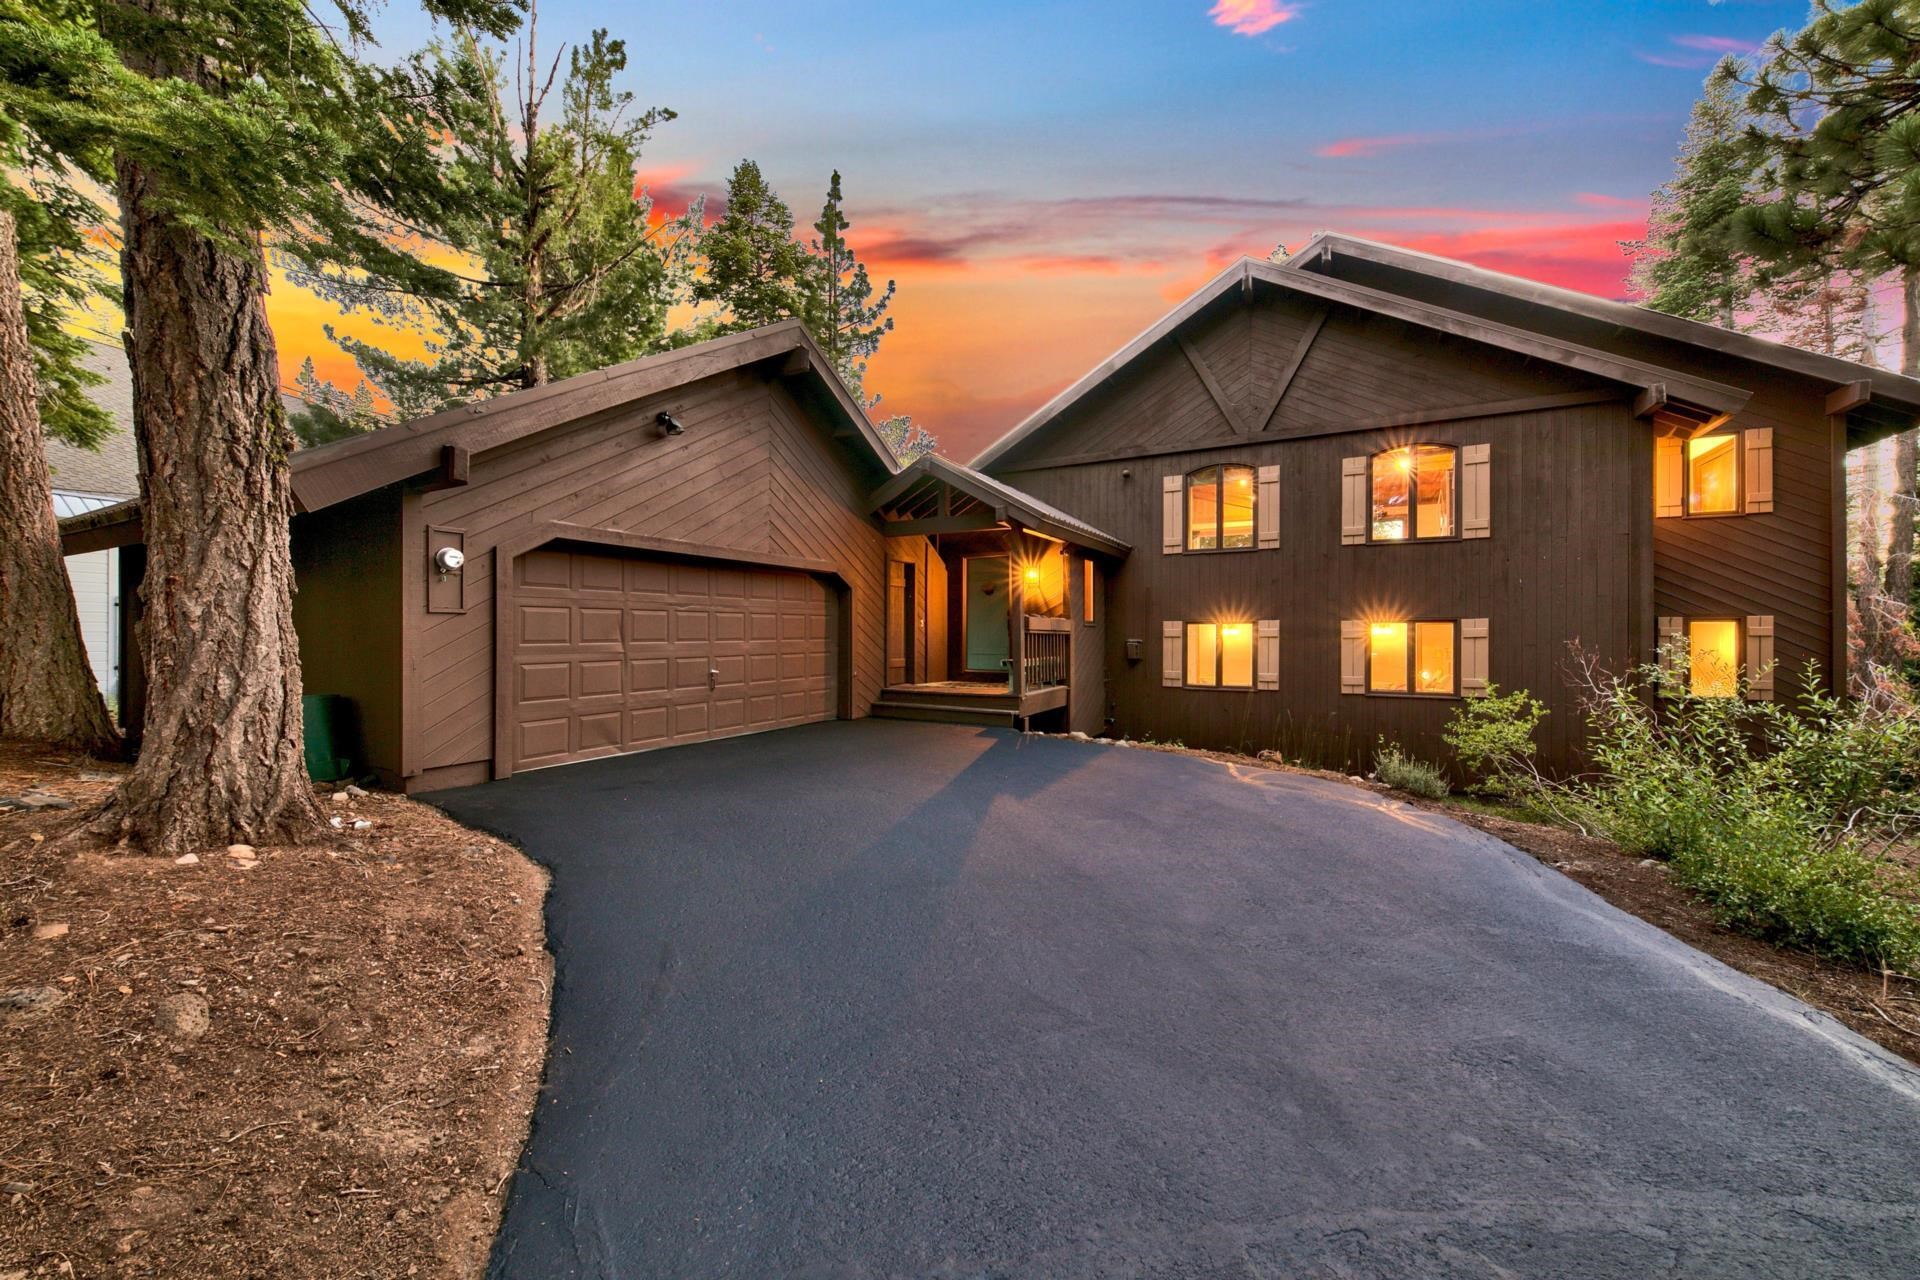 Image for 11068 K T Court, Truckee, CA 96161-6101